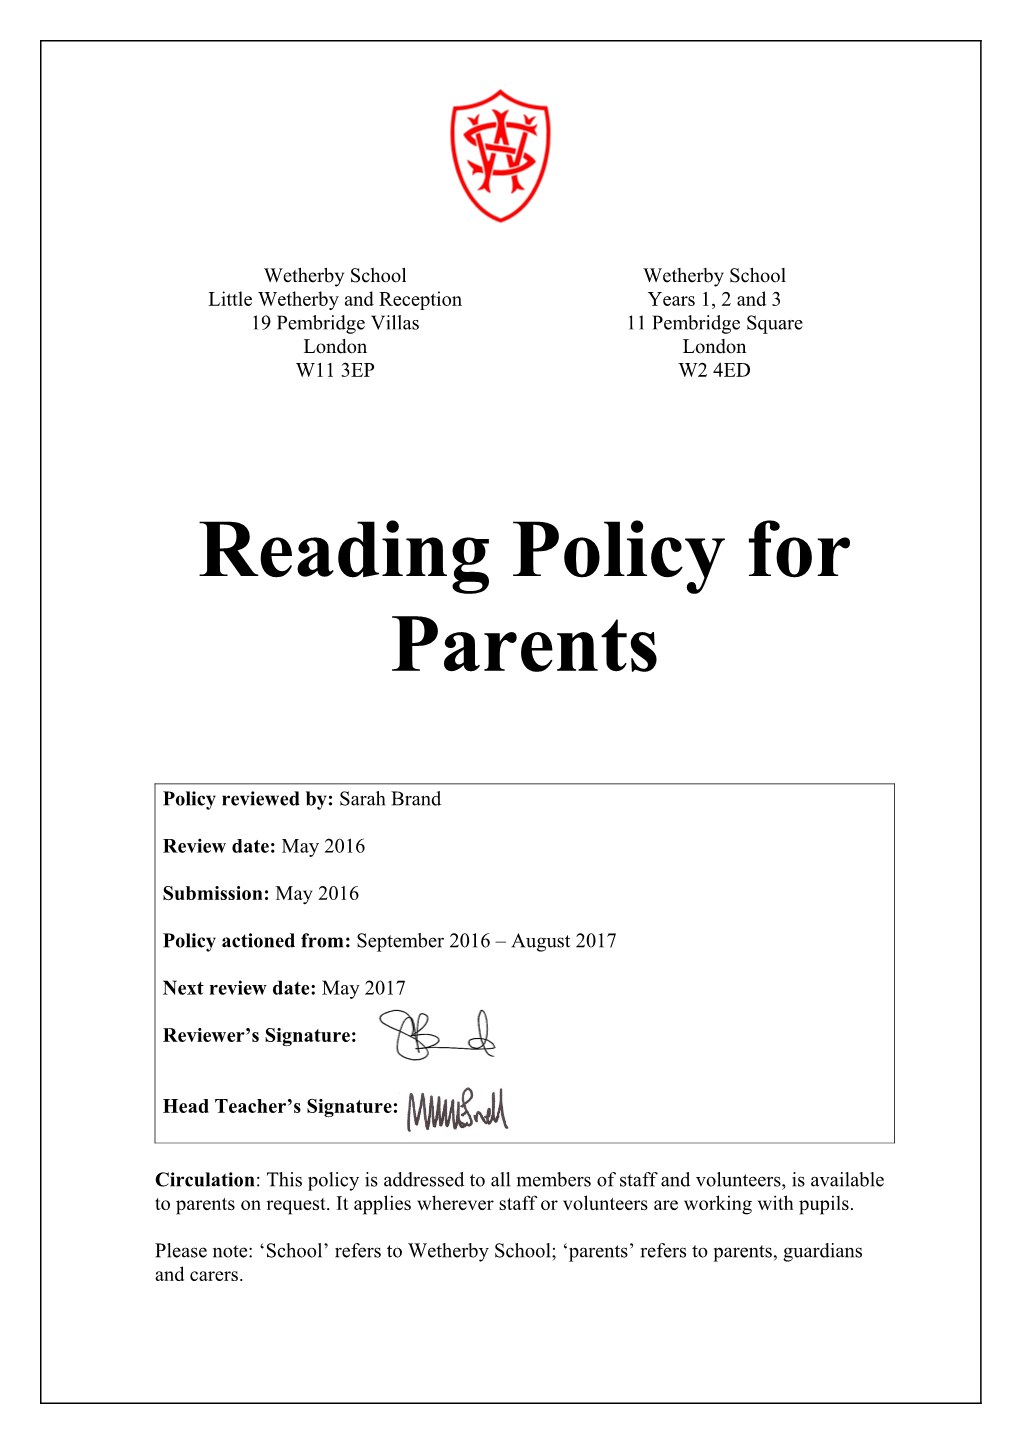 Reading Policy for Parents